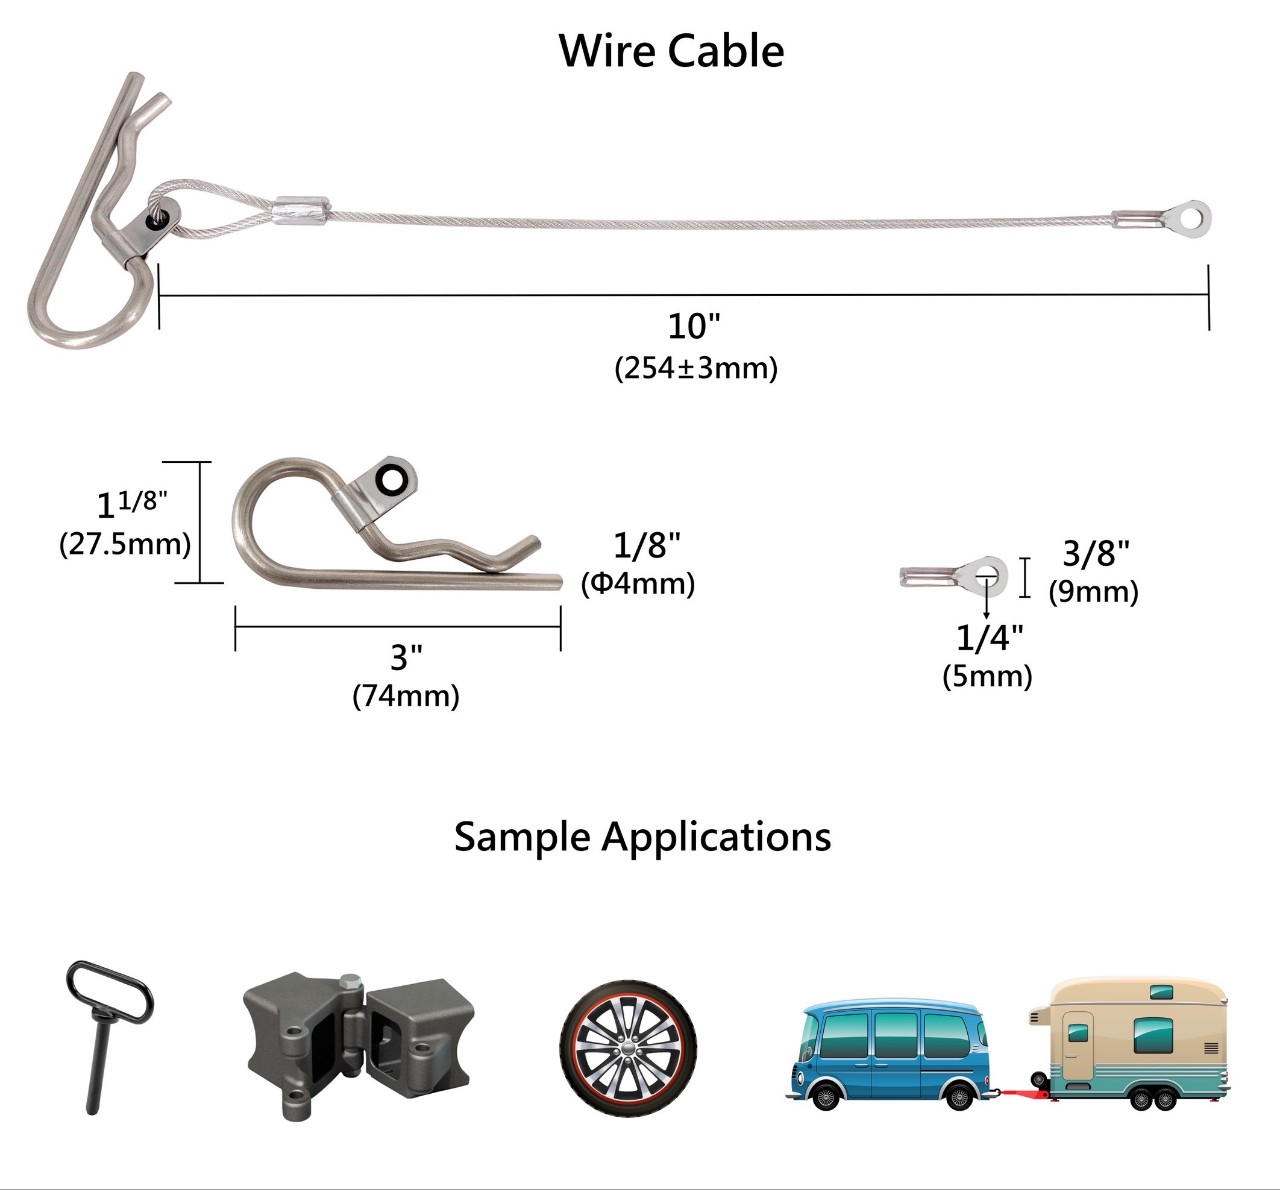 Multifunctional Vinyl Coated Steel Wire Cable with Pin & Eyelet 2.4mm